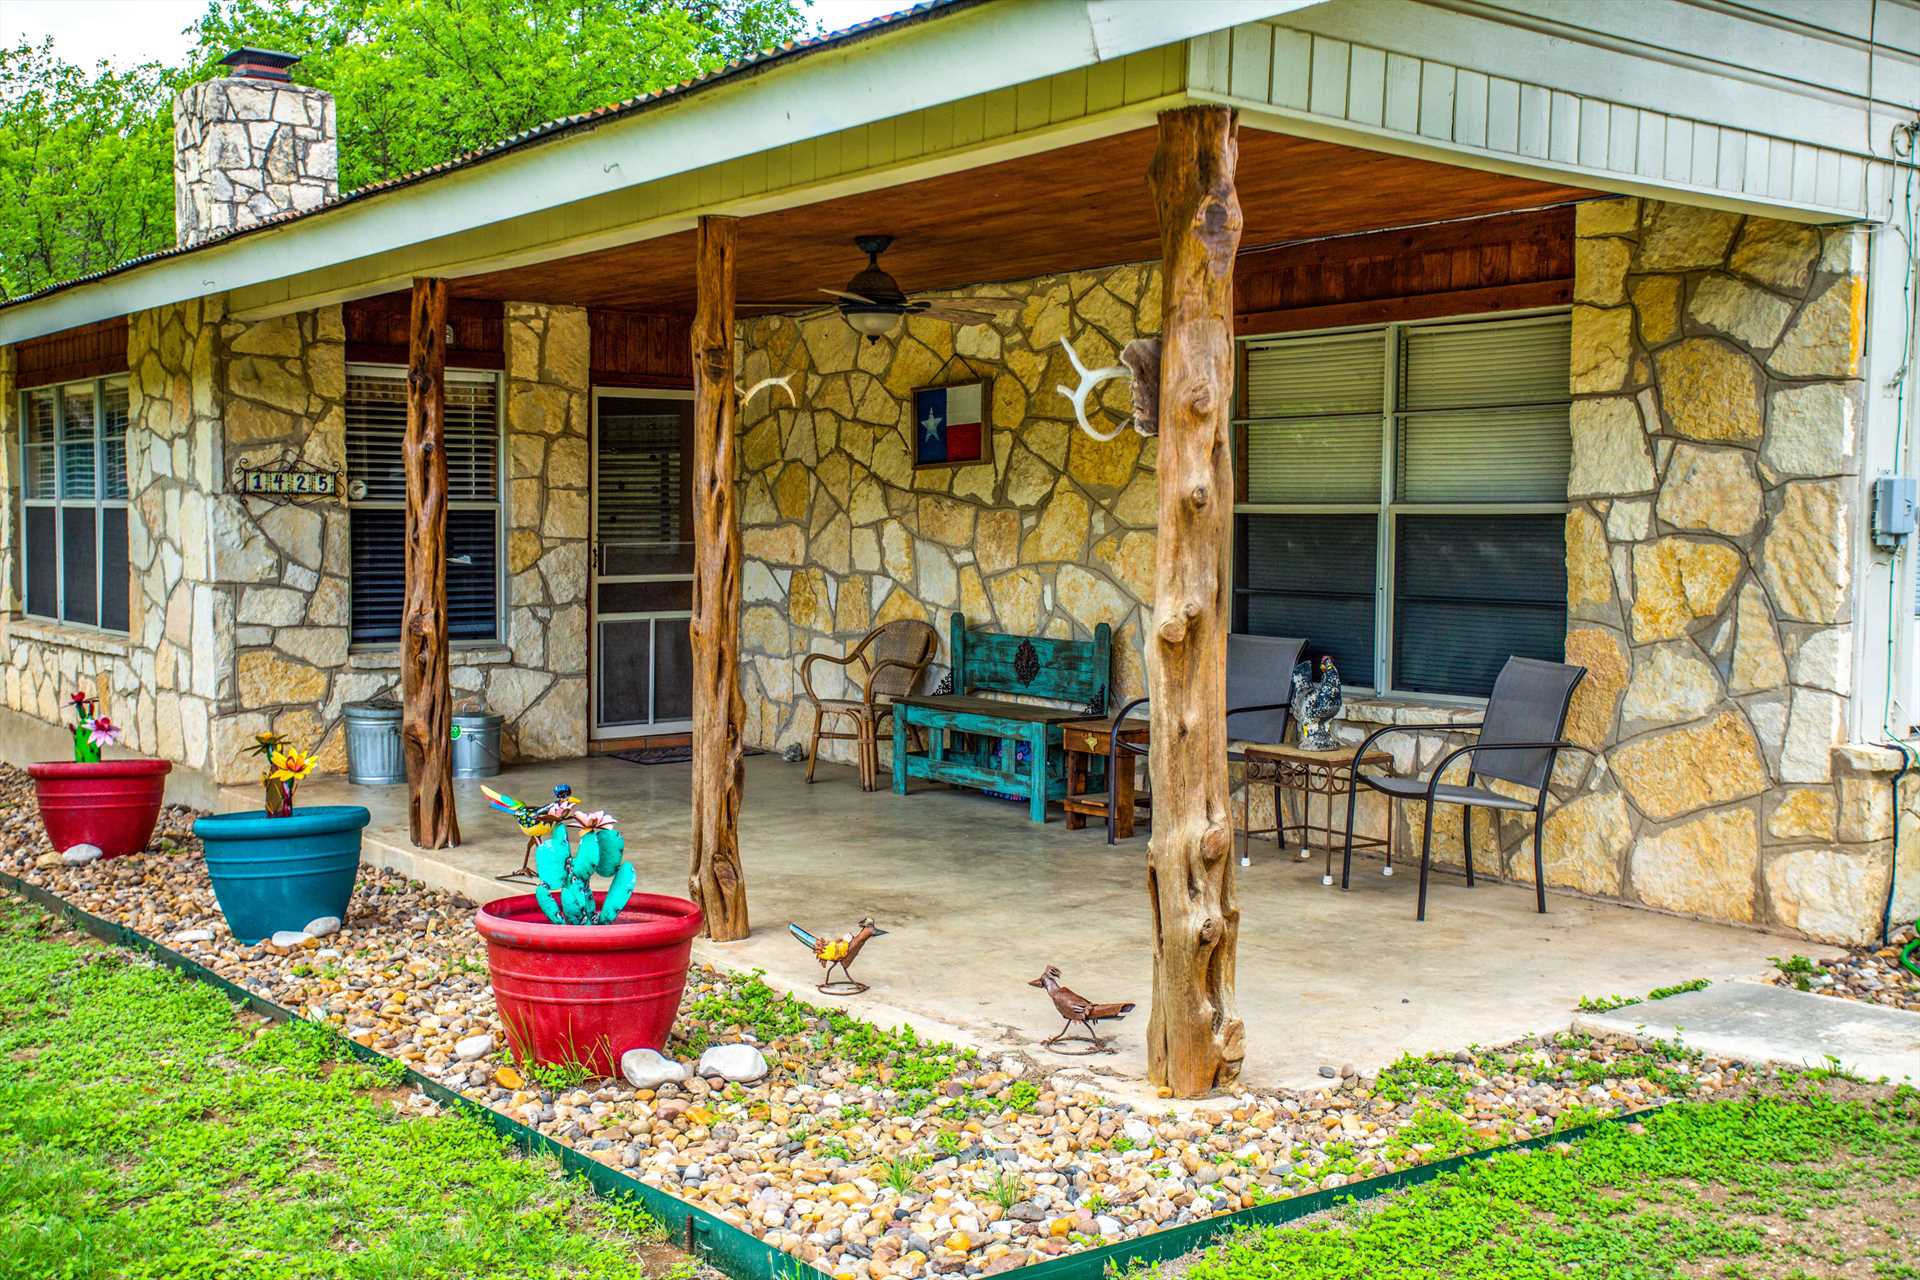                                                 There's a ceiling fan on the shaded porch, so you can enjoy a Hill Country breeze even if Mother Nature isn't providing one!